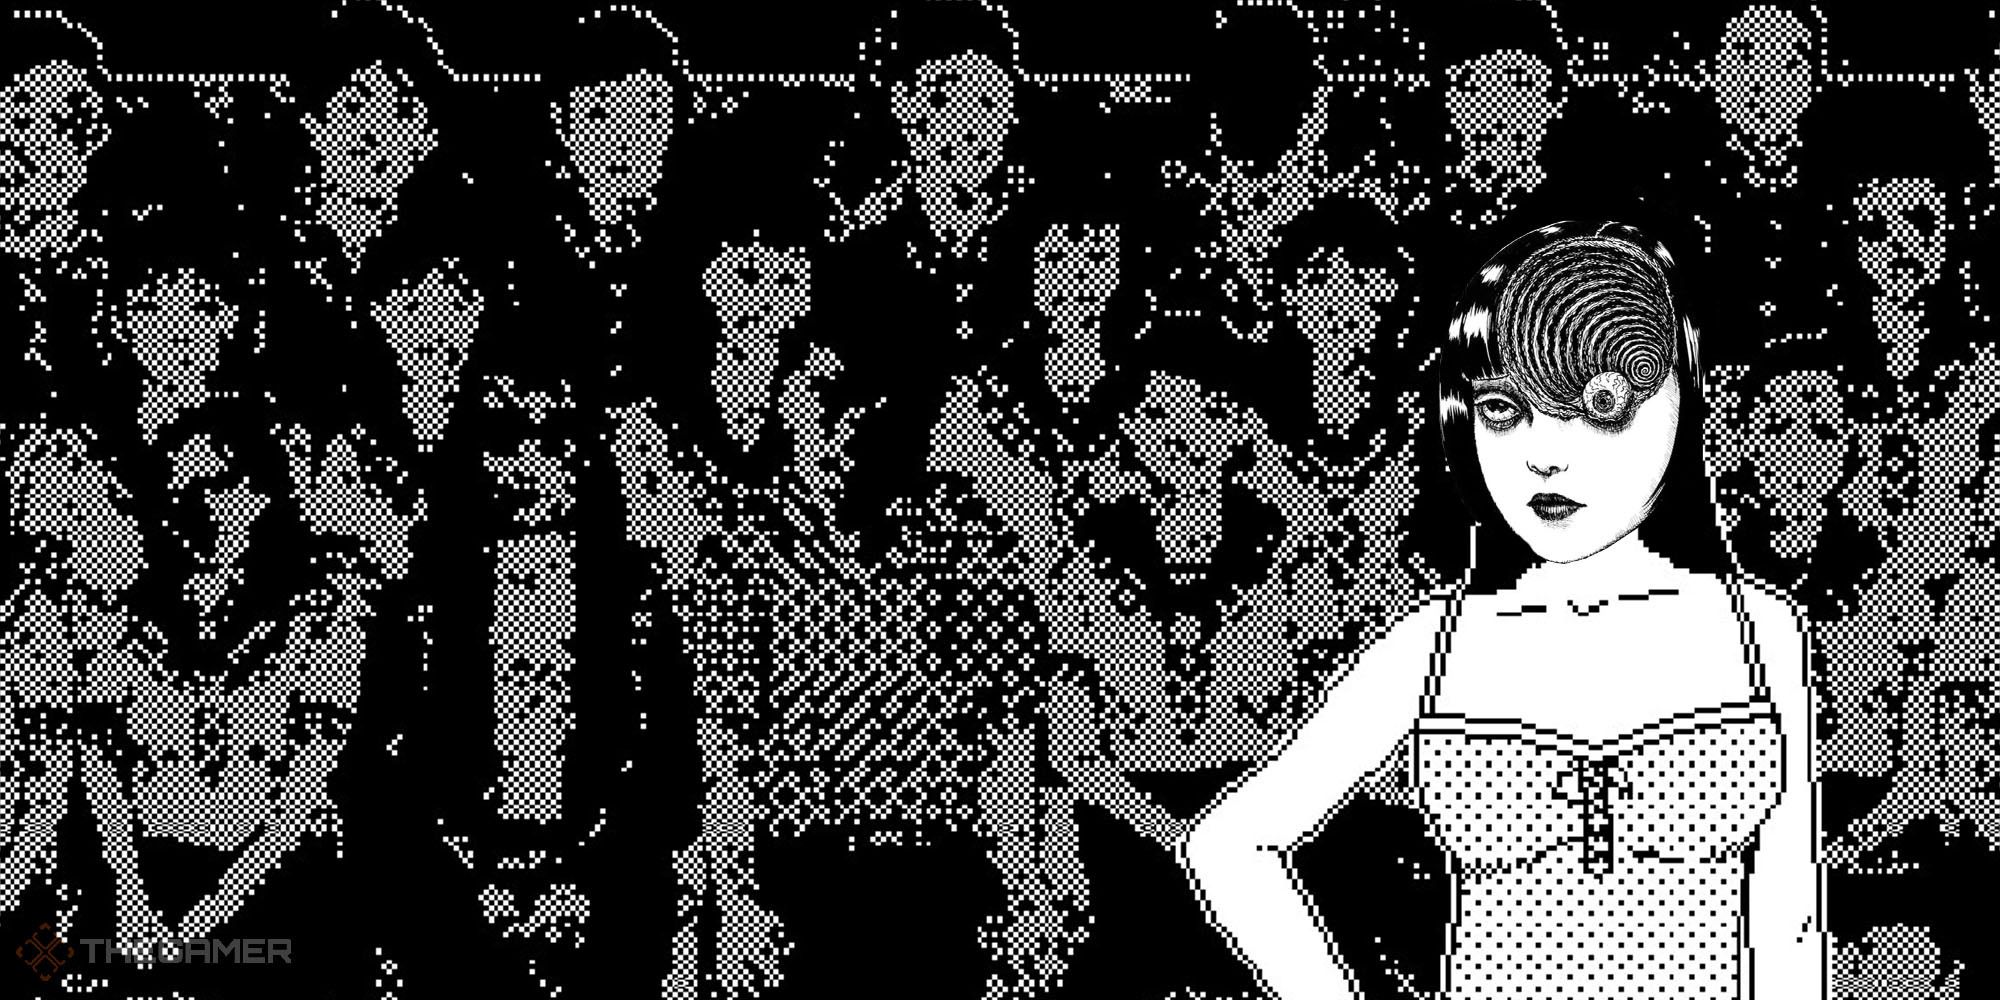 Junji Ito-inspired horror game World of Horror has mysteries and horrors